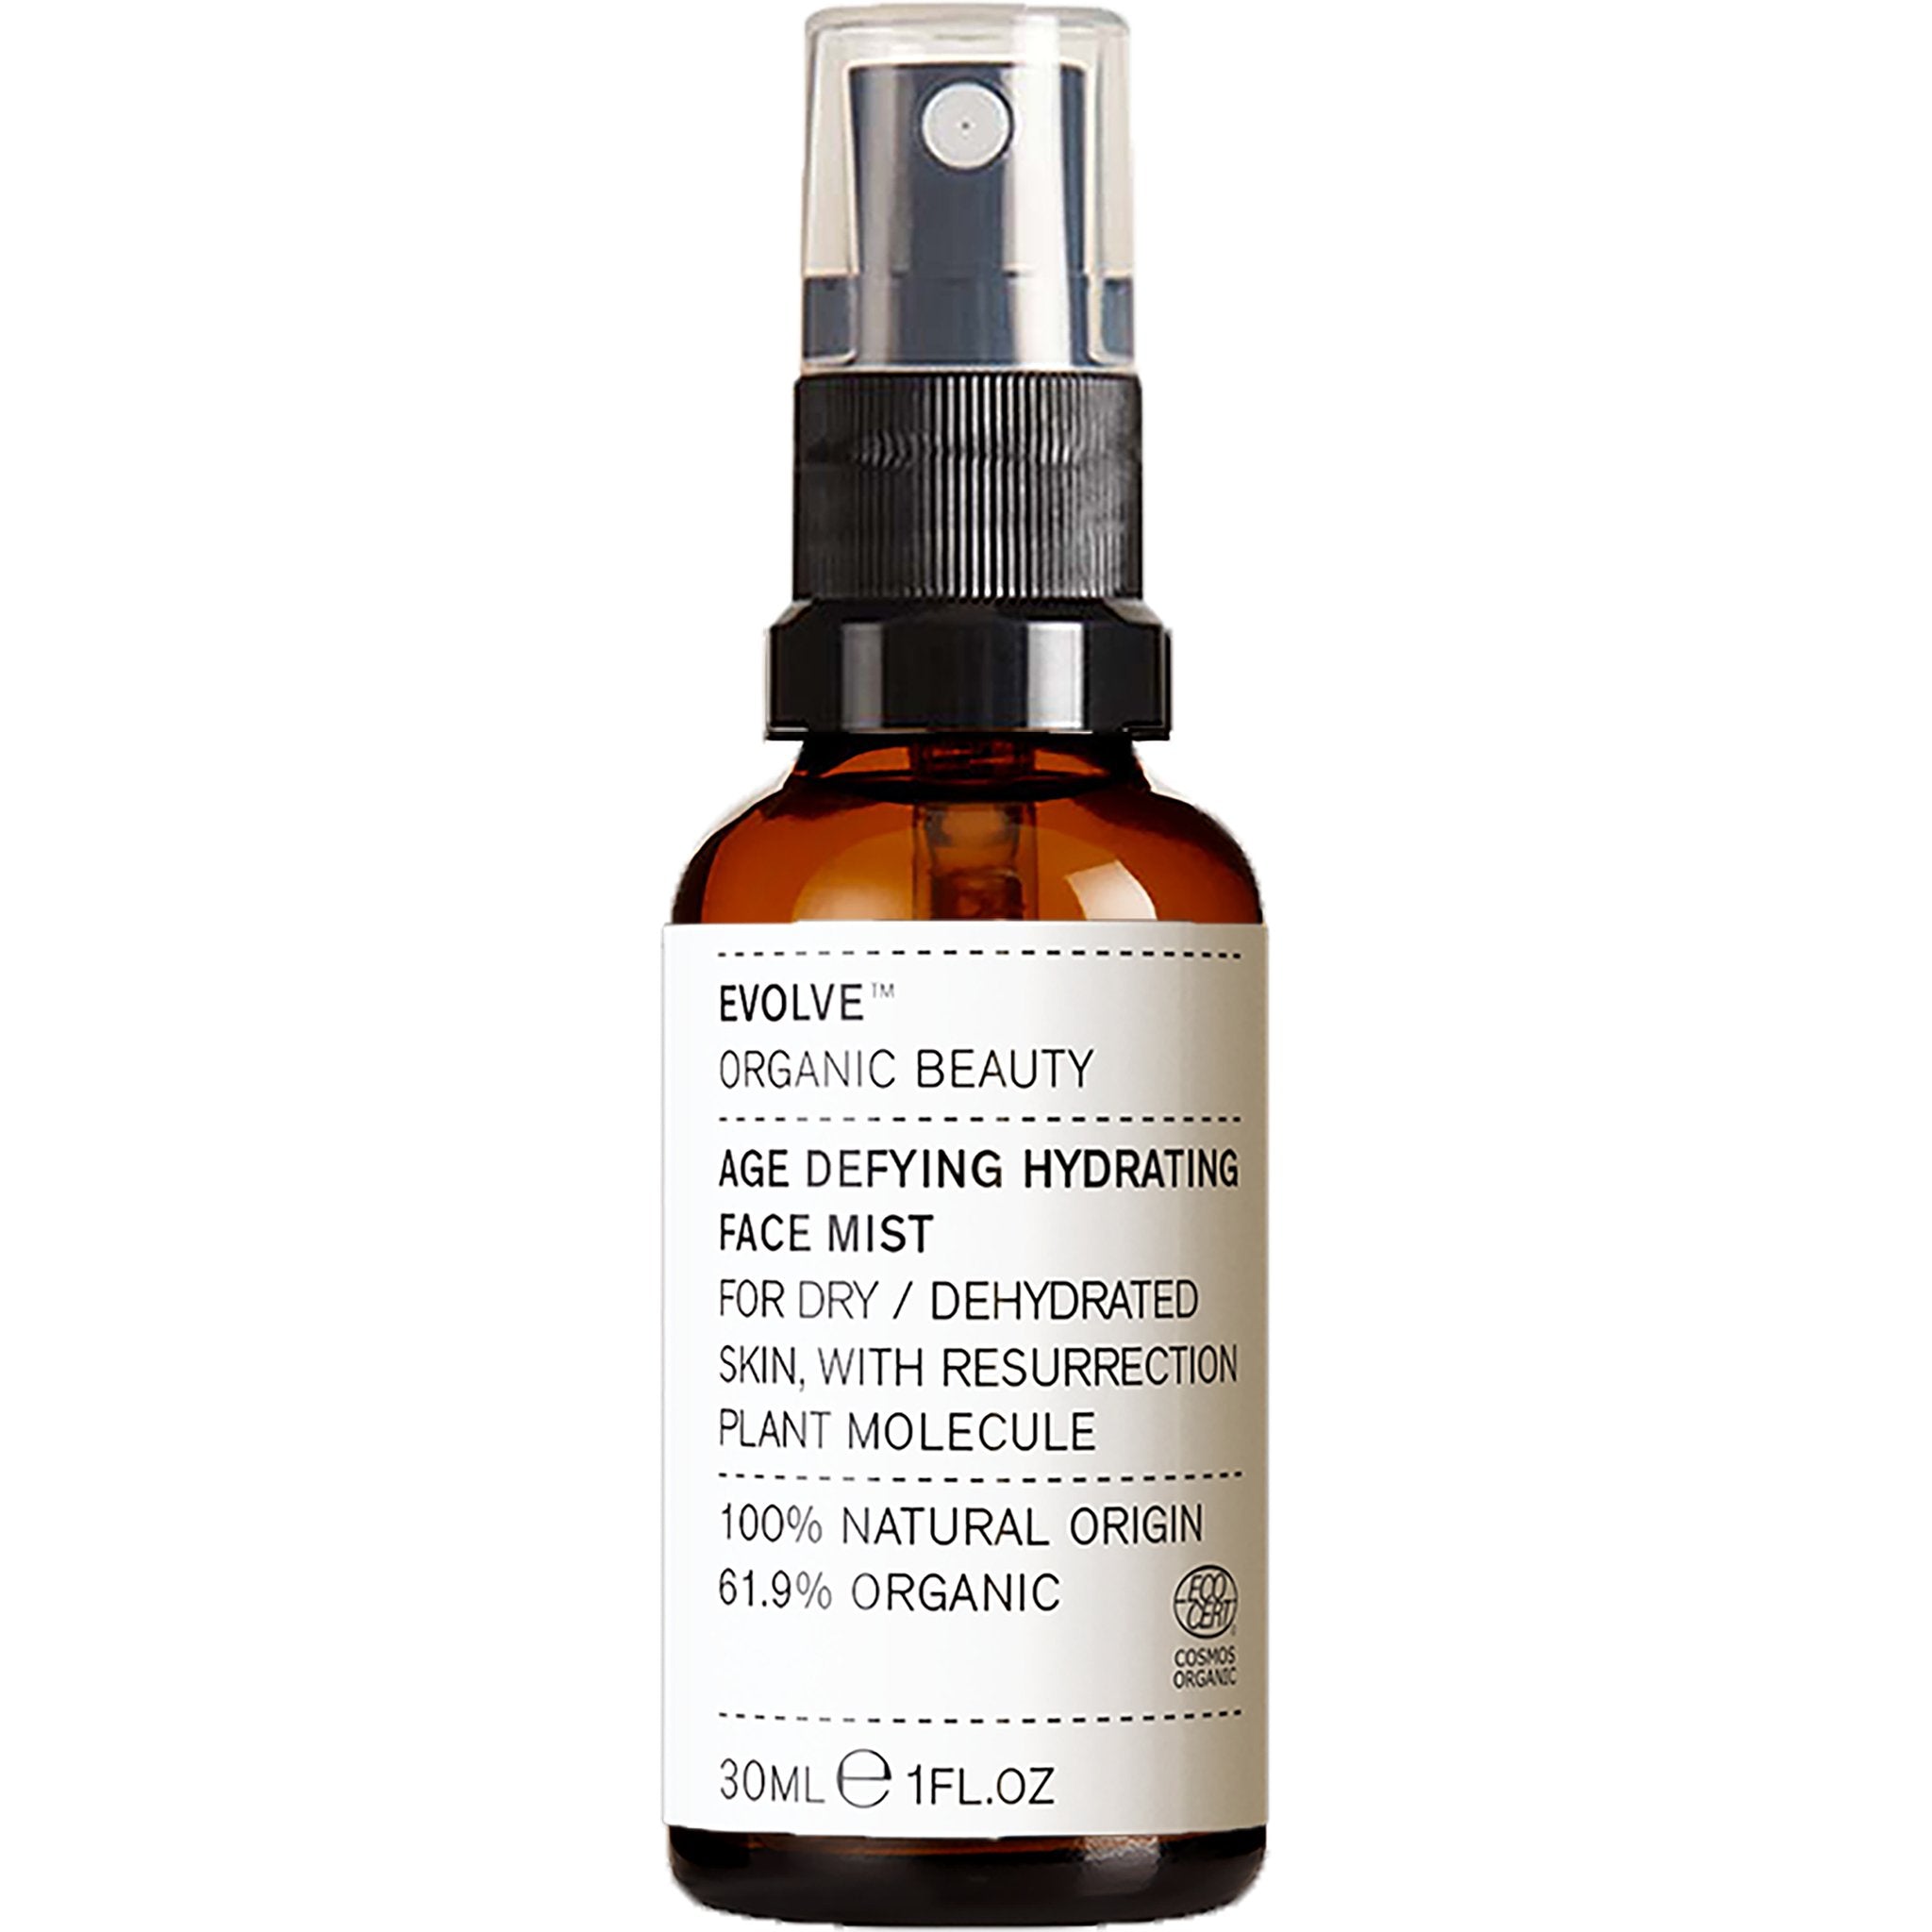 Age Defying Hydrating Face Mist - mypure.co.uk